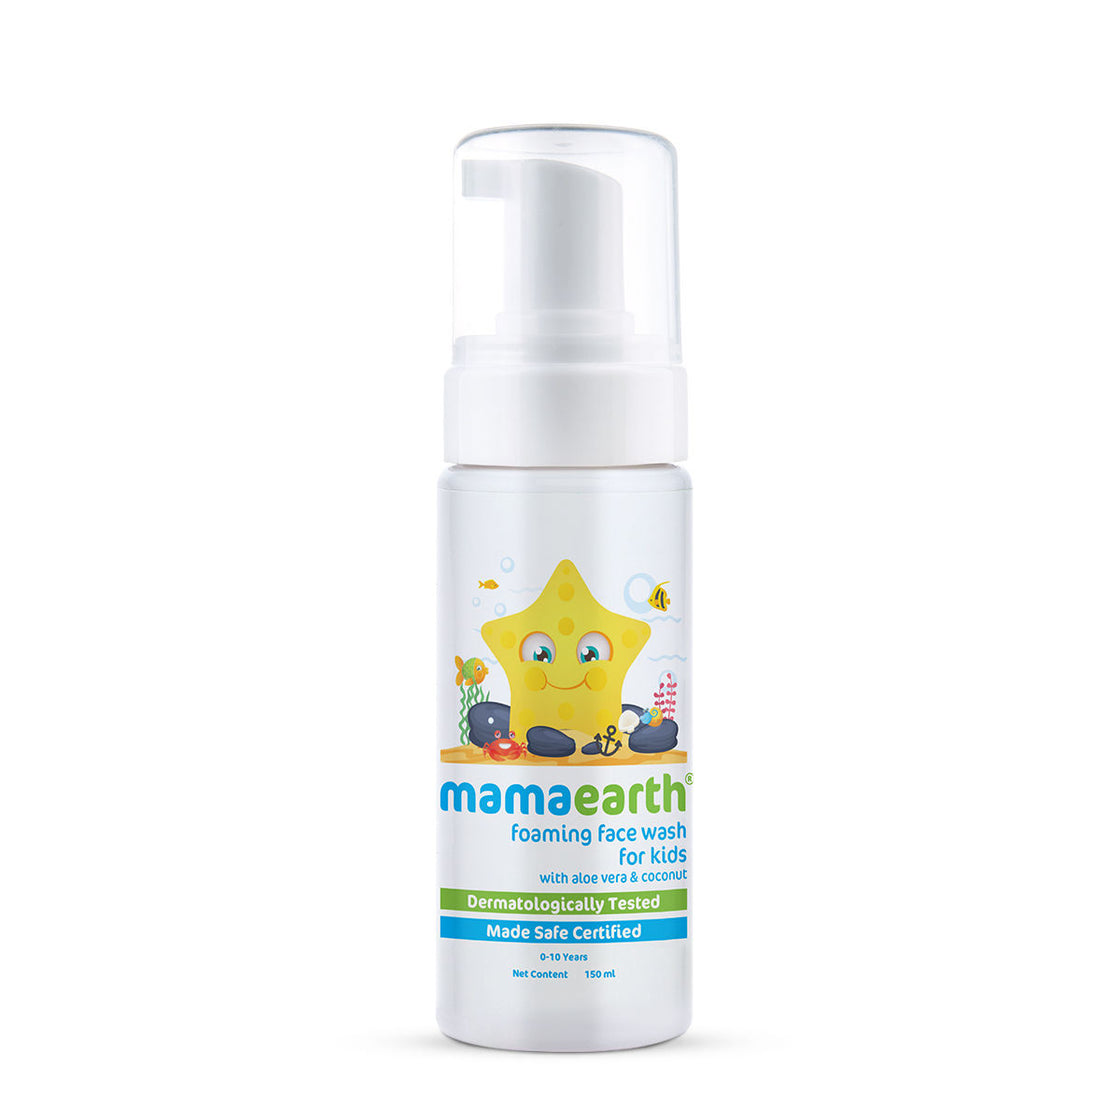 Mamaearth Foaming Face Wash For Kids With Aloe Vera & Coconut For Gentle Cleansing-7